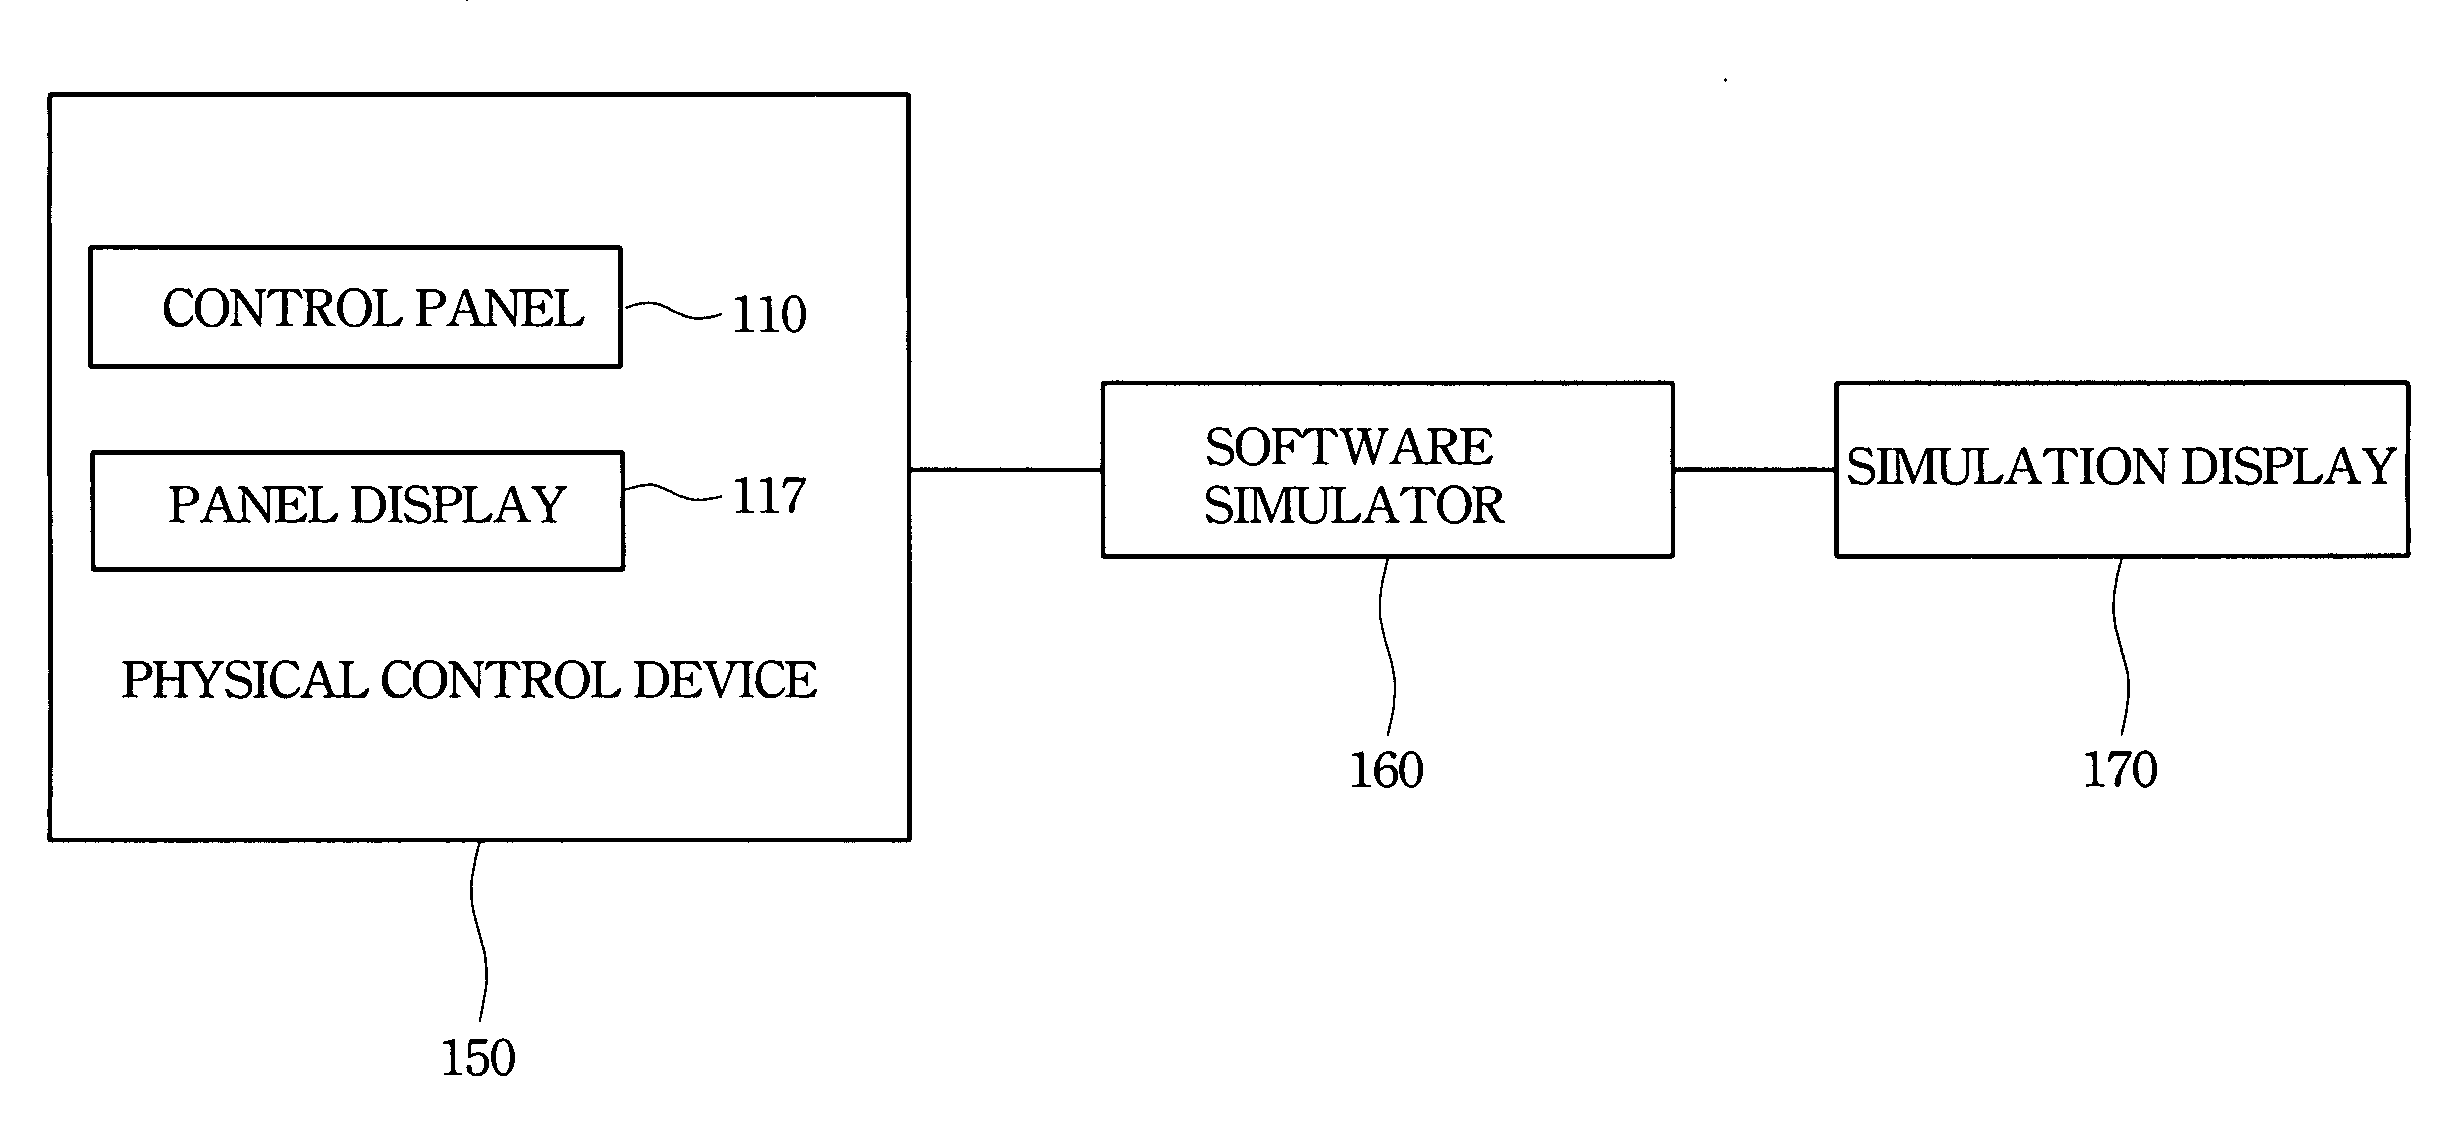 Operation training simulation system for computer numerical control (CNC) machine